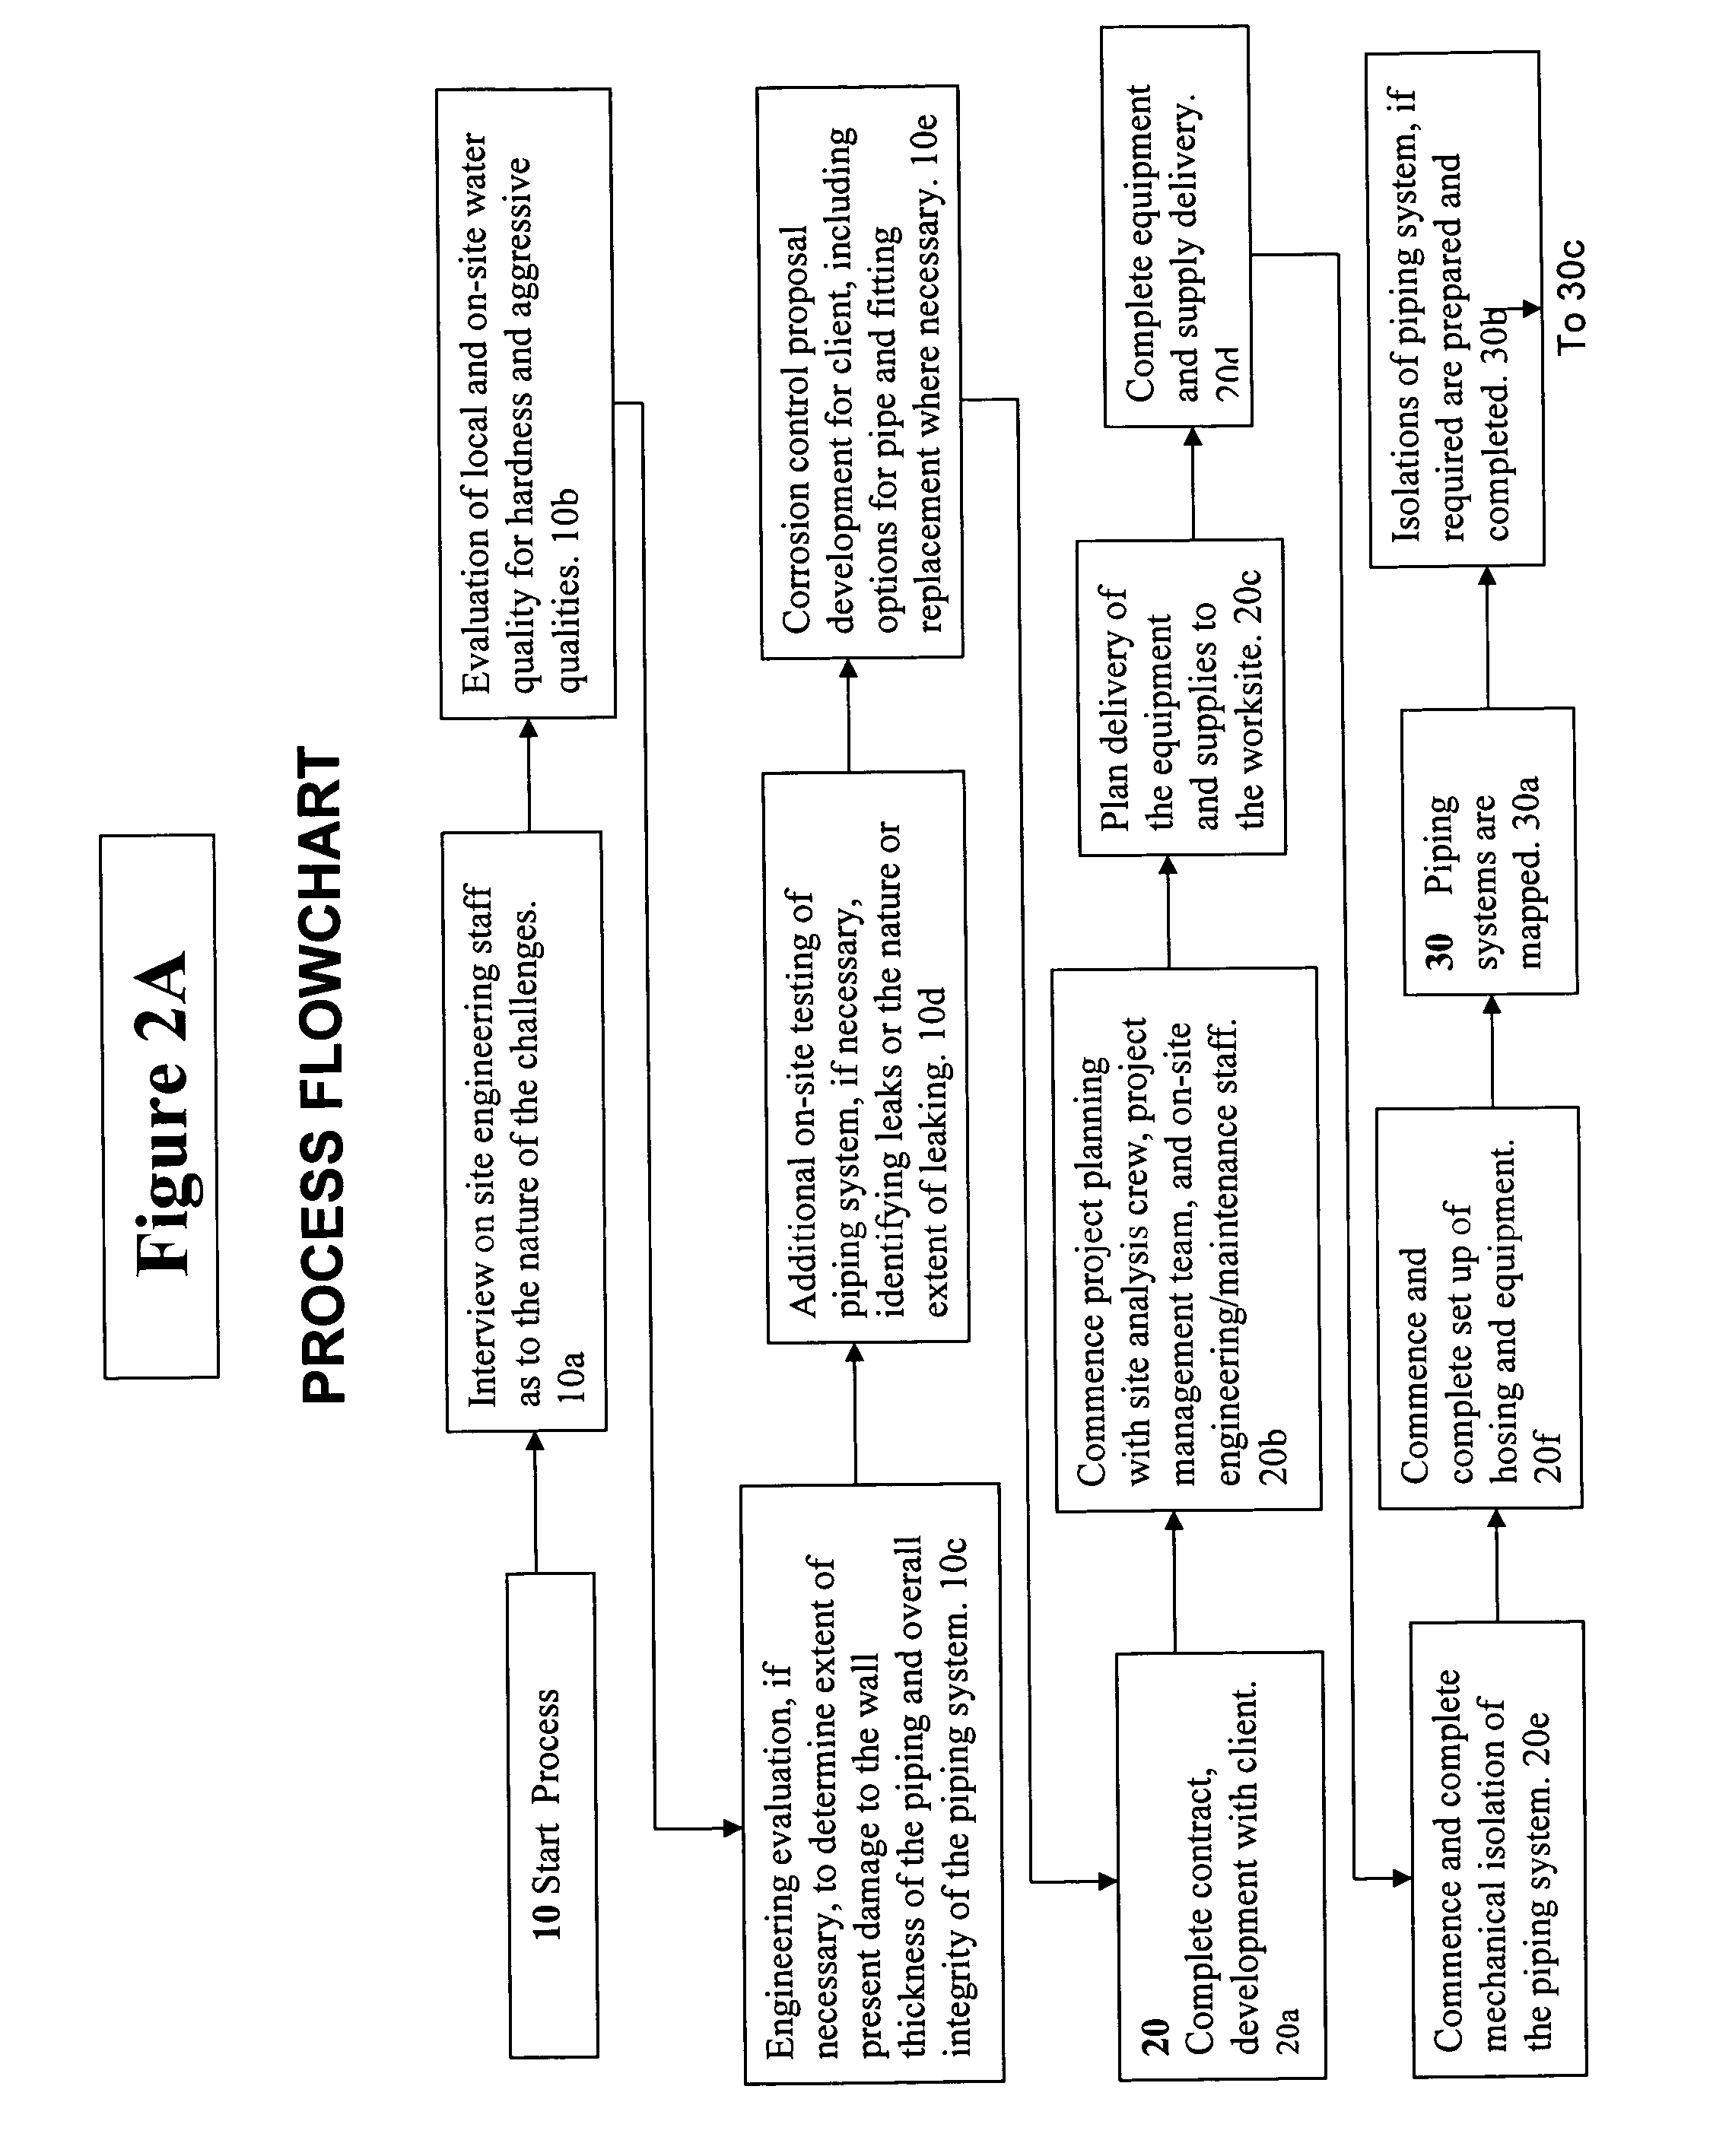 Methods and systems for coating and sealing inside piping systems